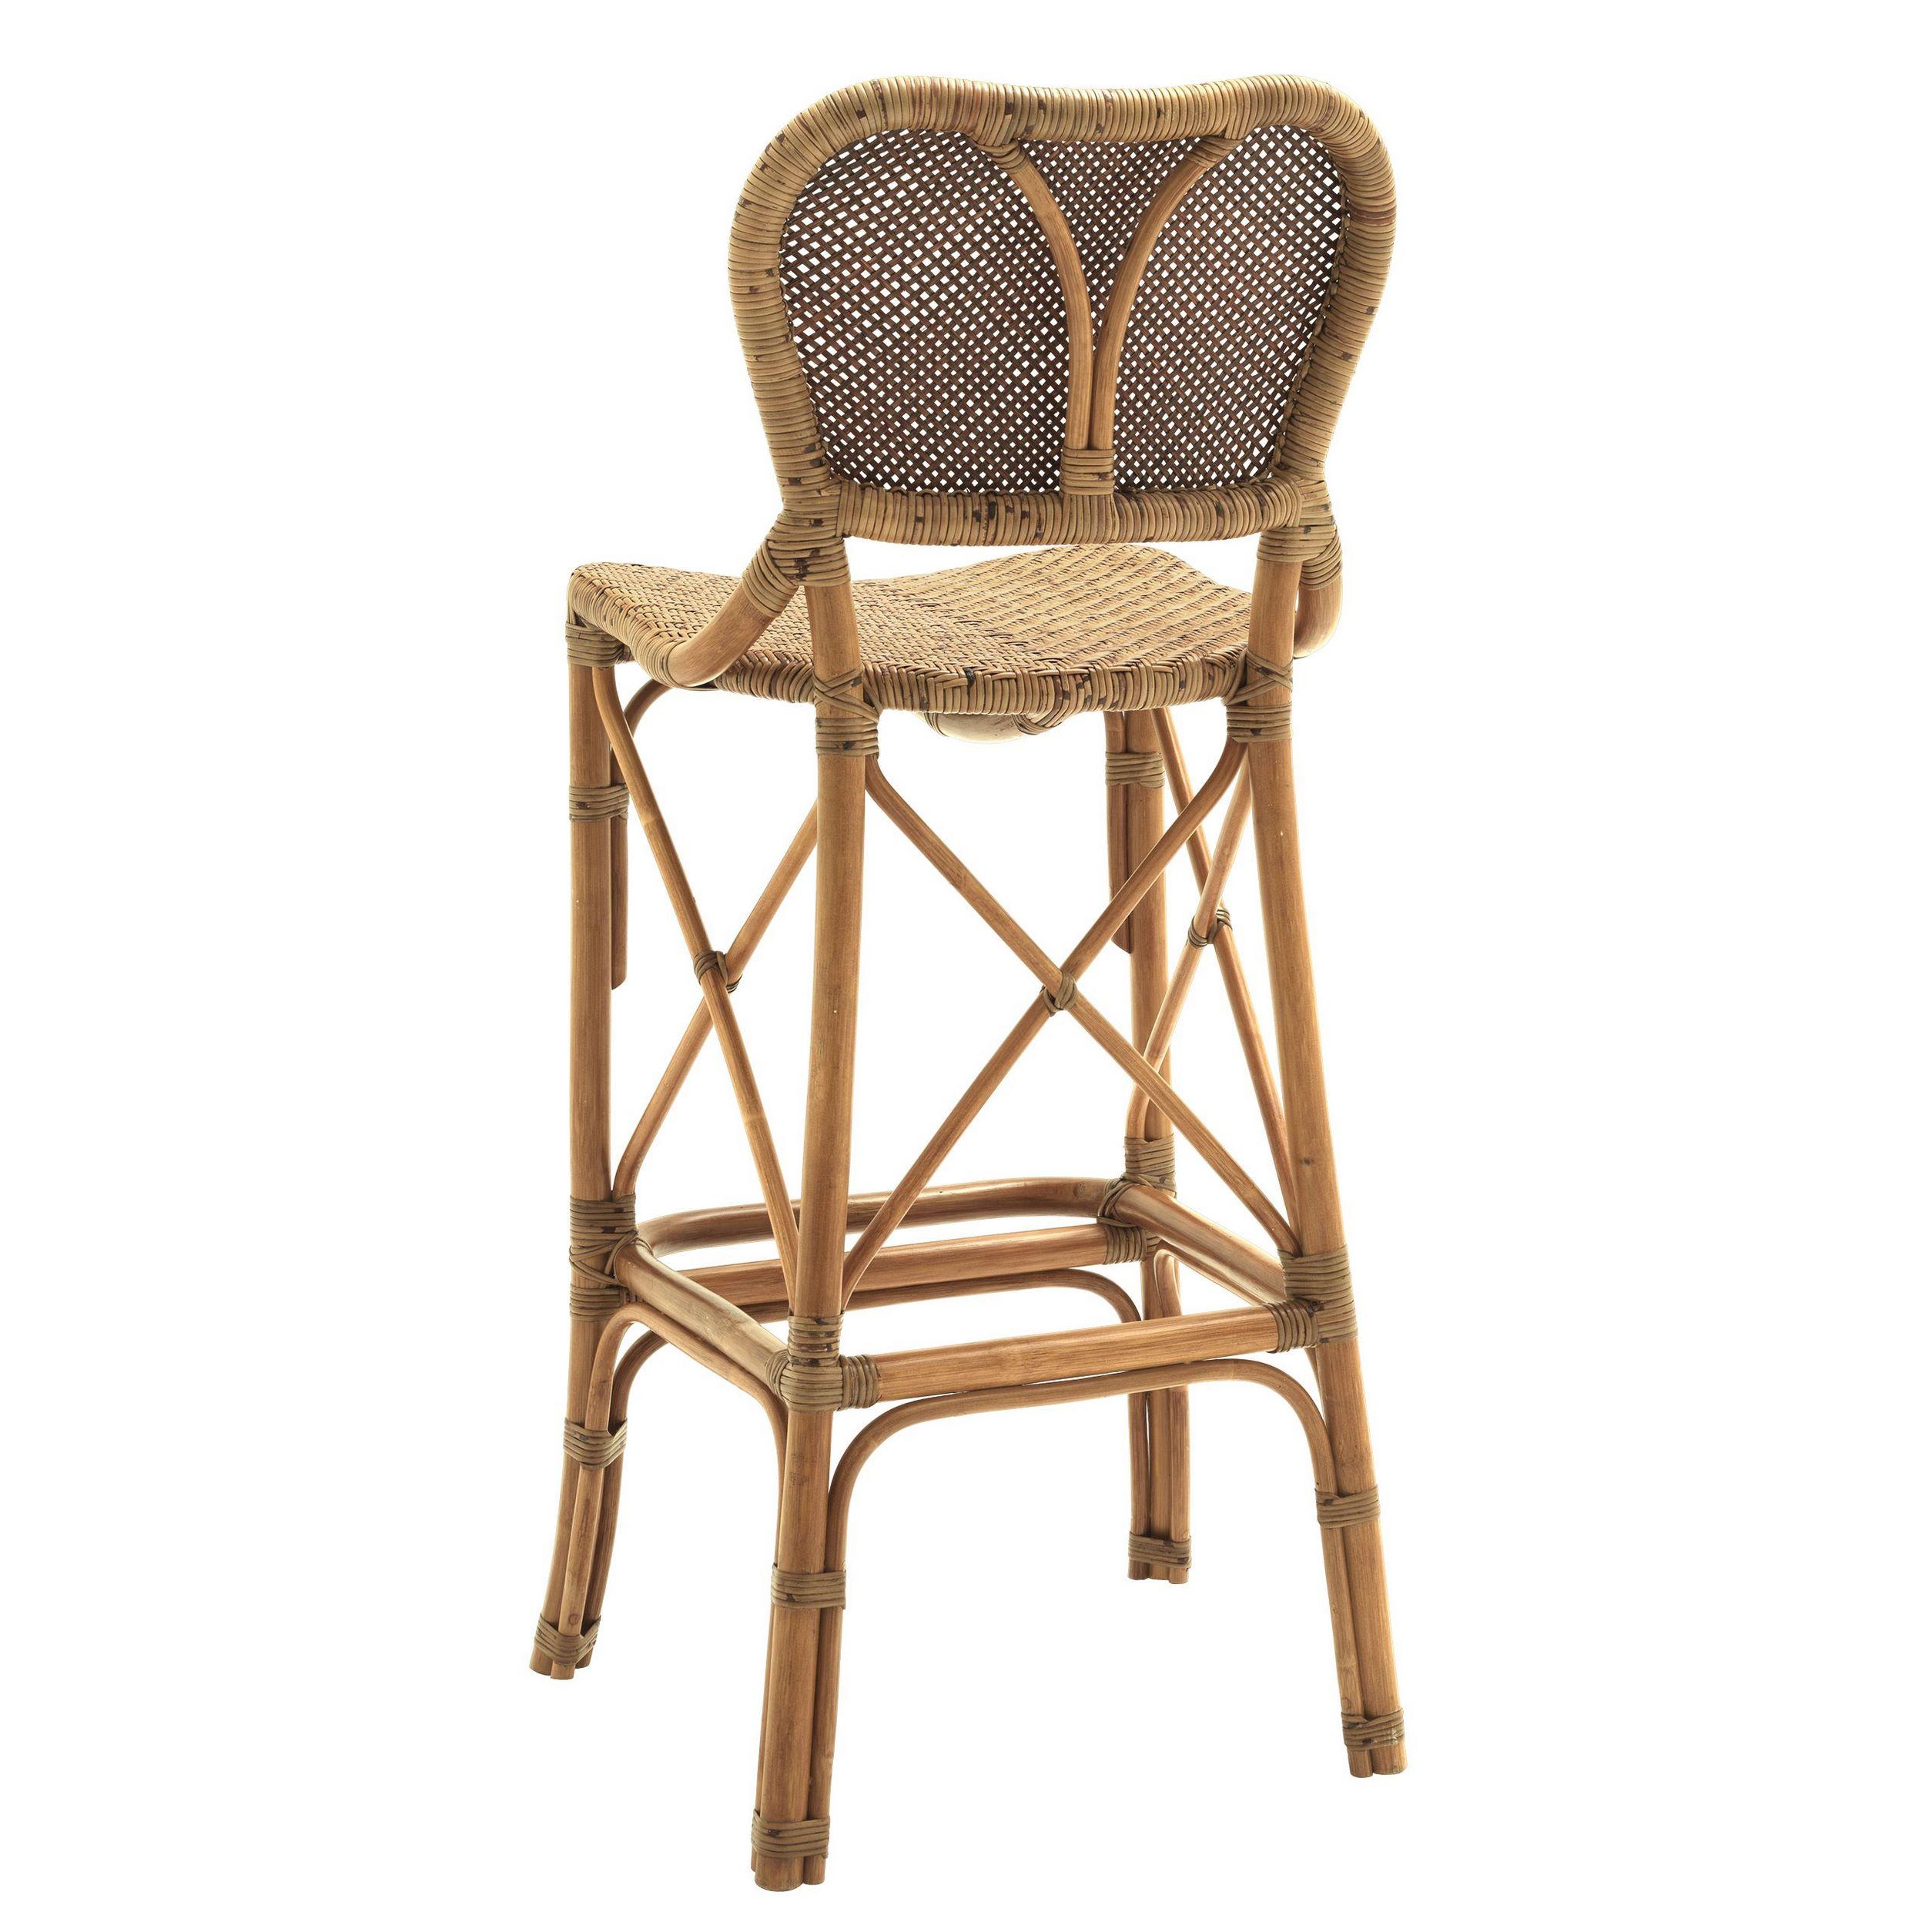 Handcrafted curved rattan and braided wicker cane bar stool.